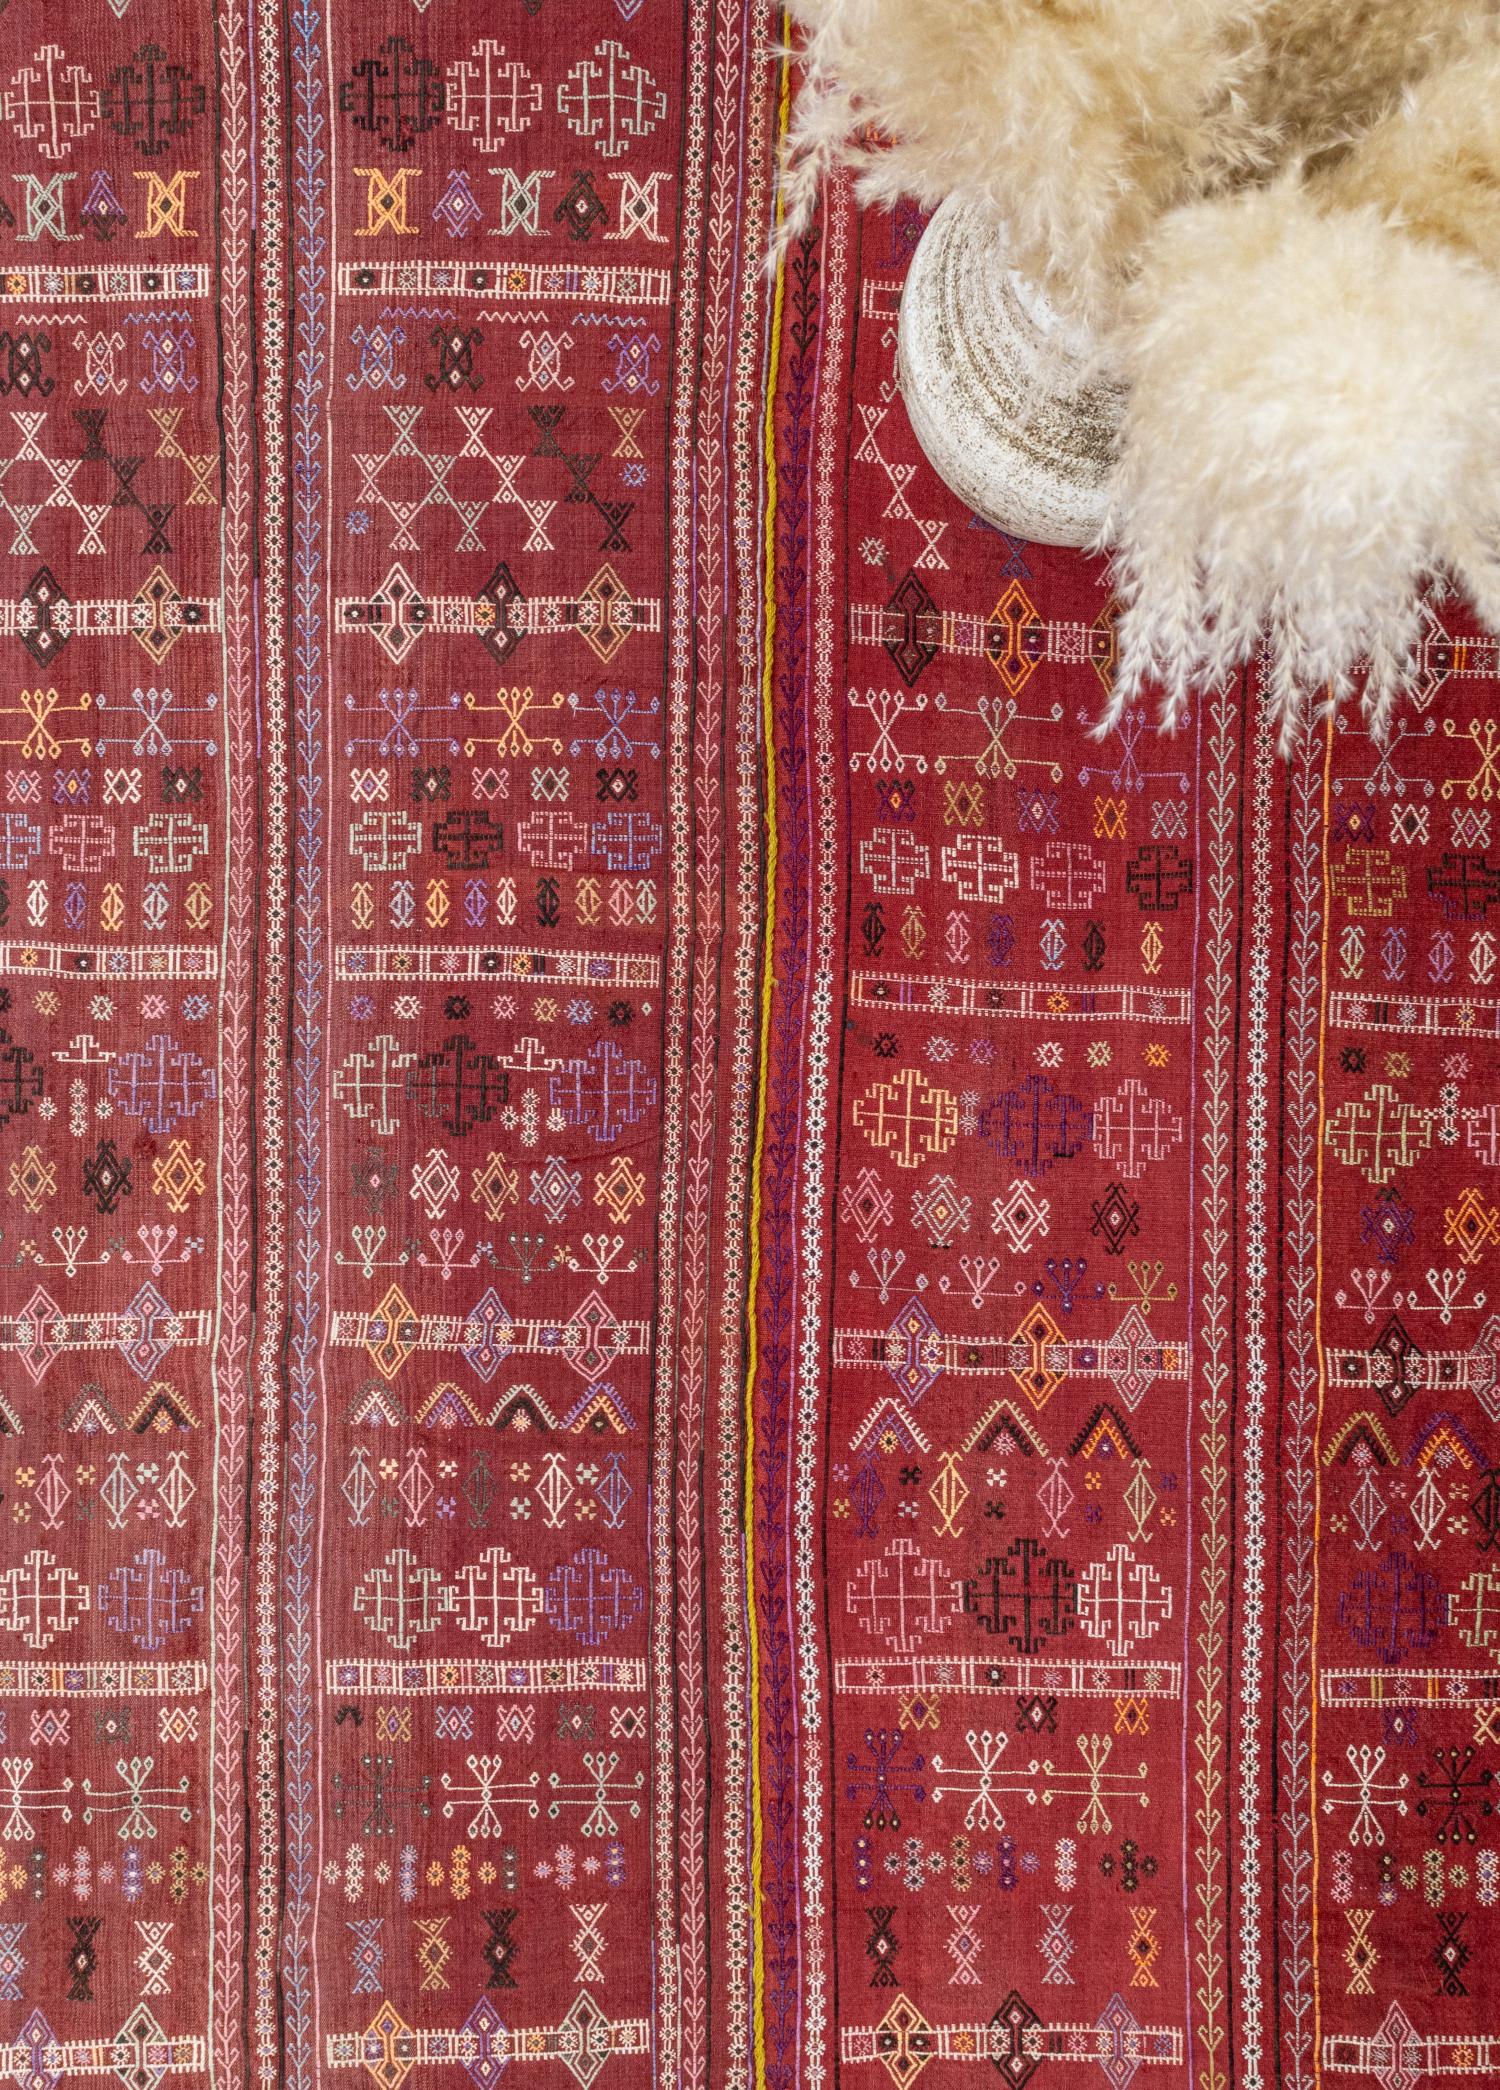 What Does Vintage Rug Mean? How Old Should an Antique Rug Be?